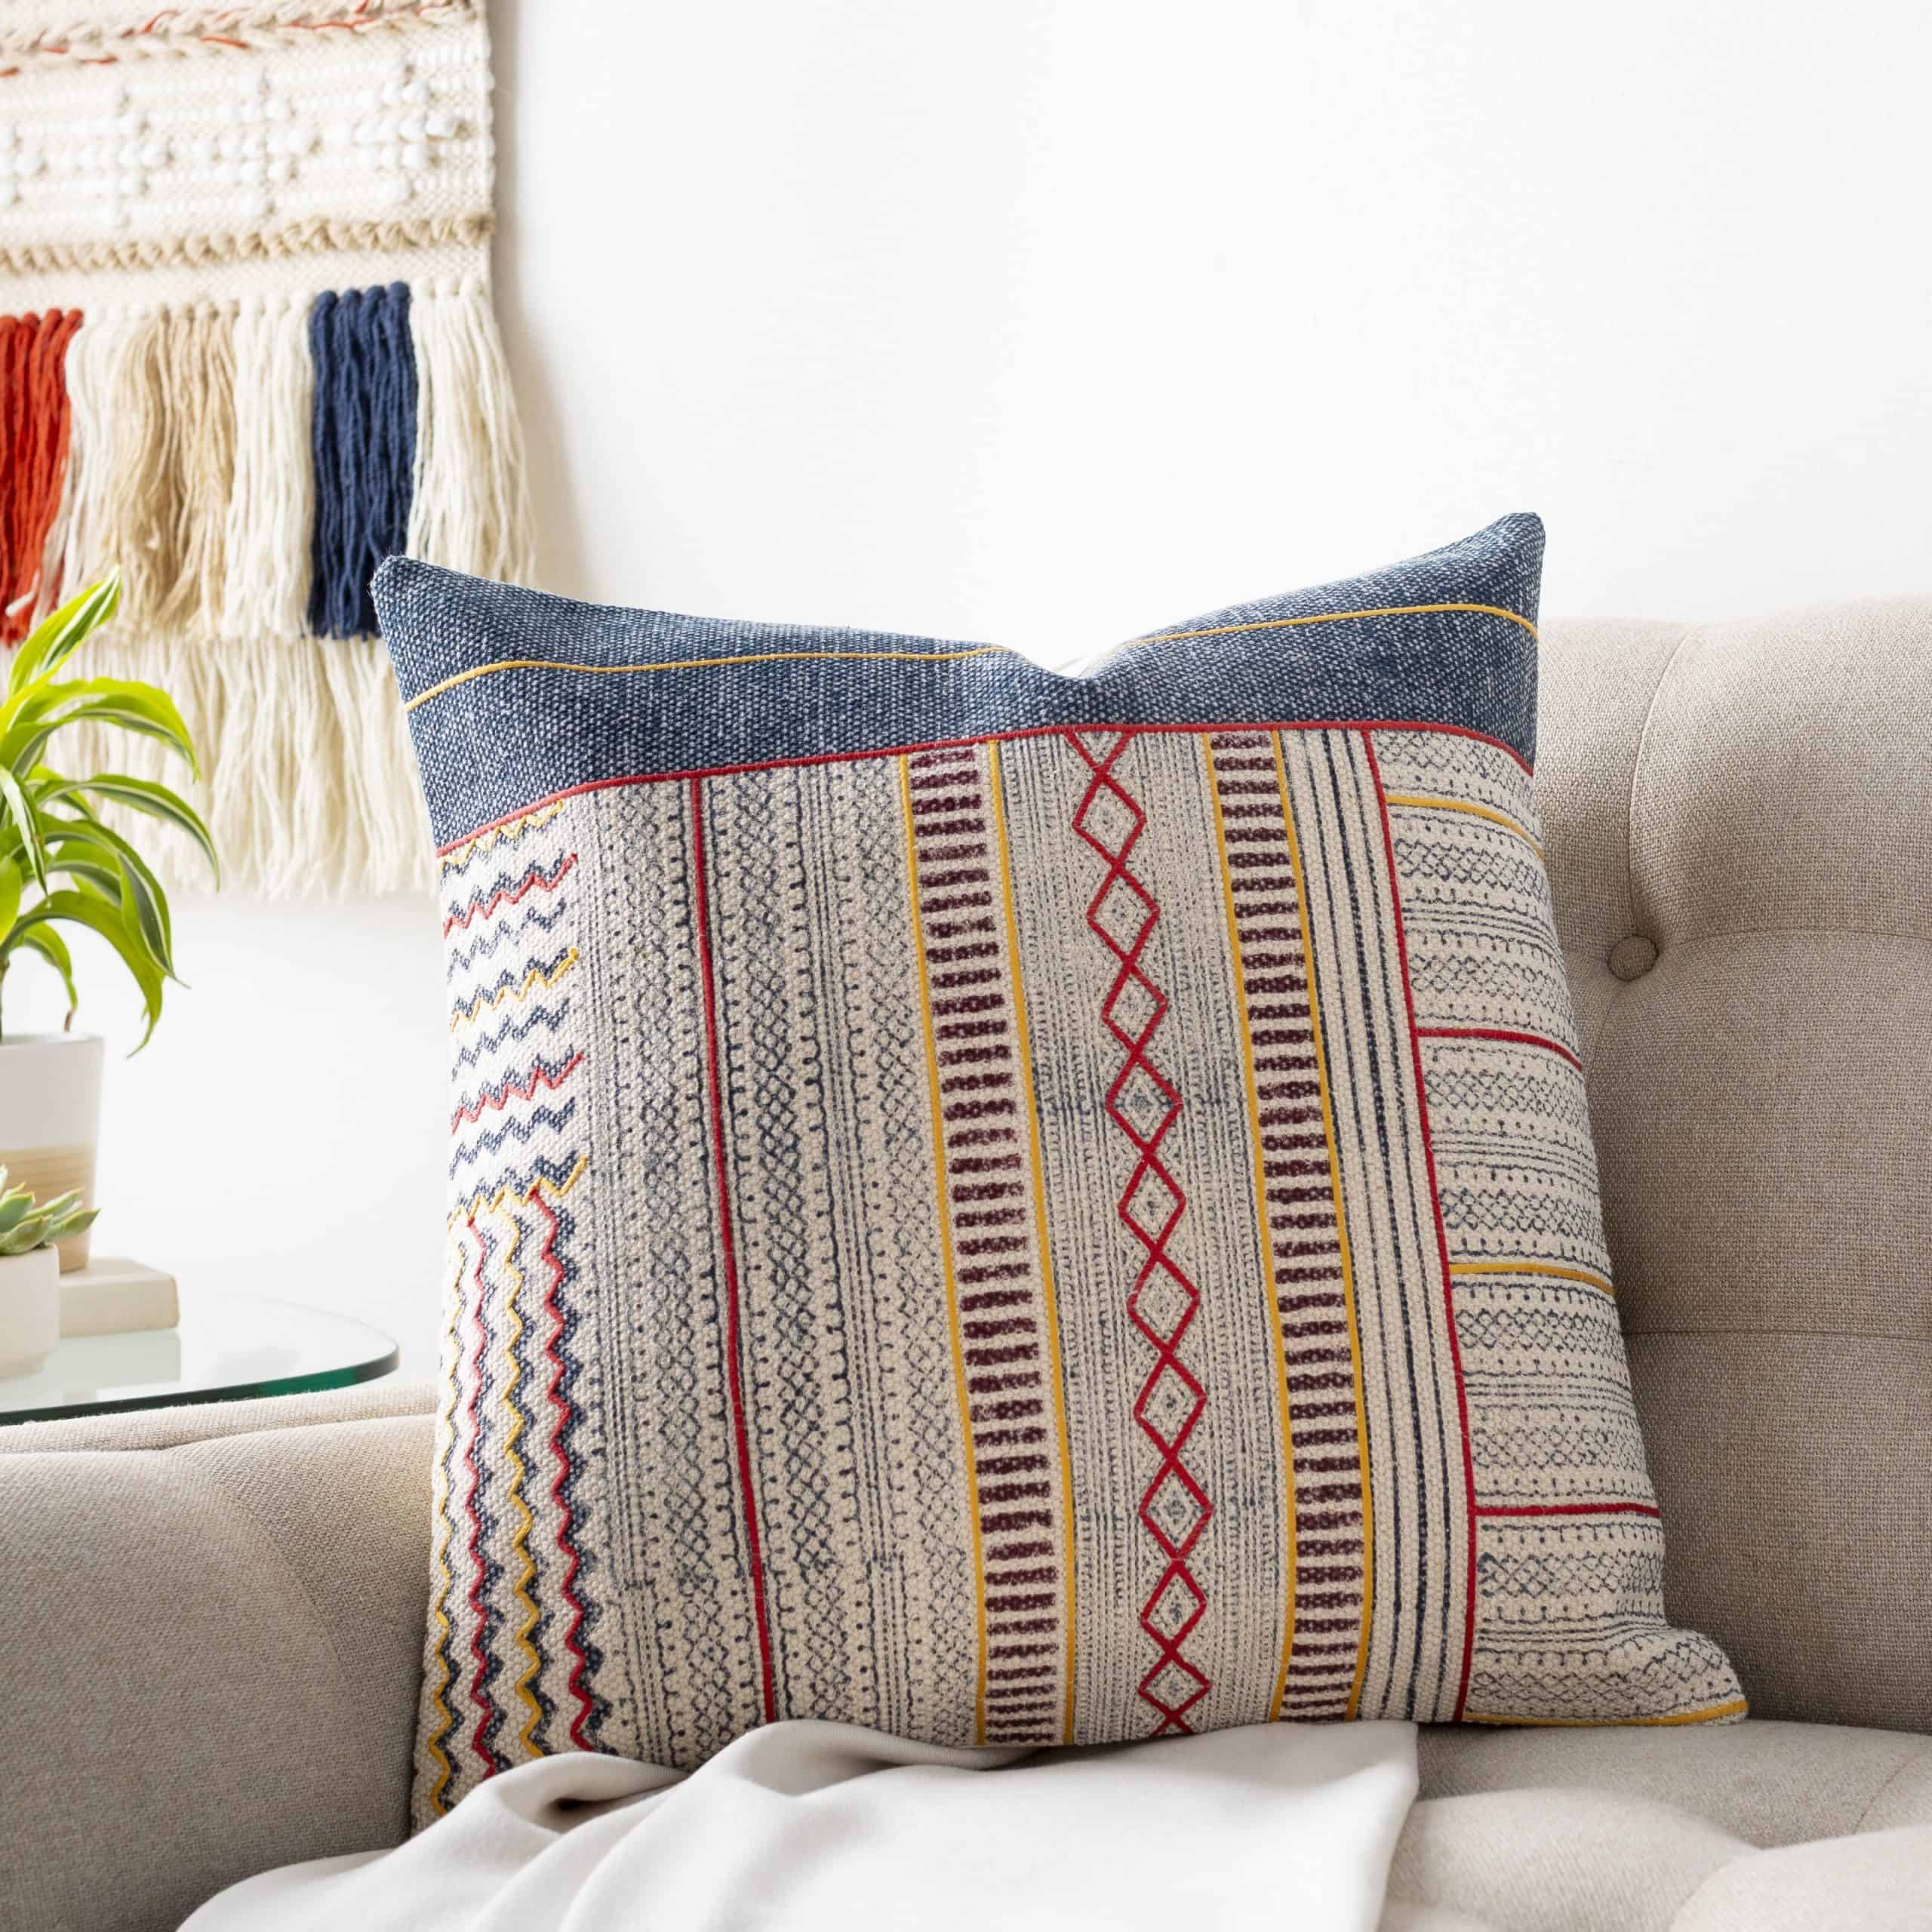 Colorful Embroidered Throw Pillows For A Boho Chic Look